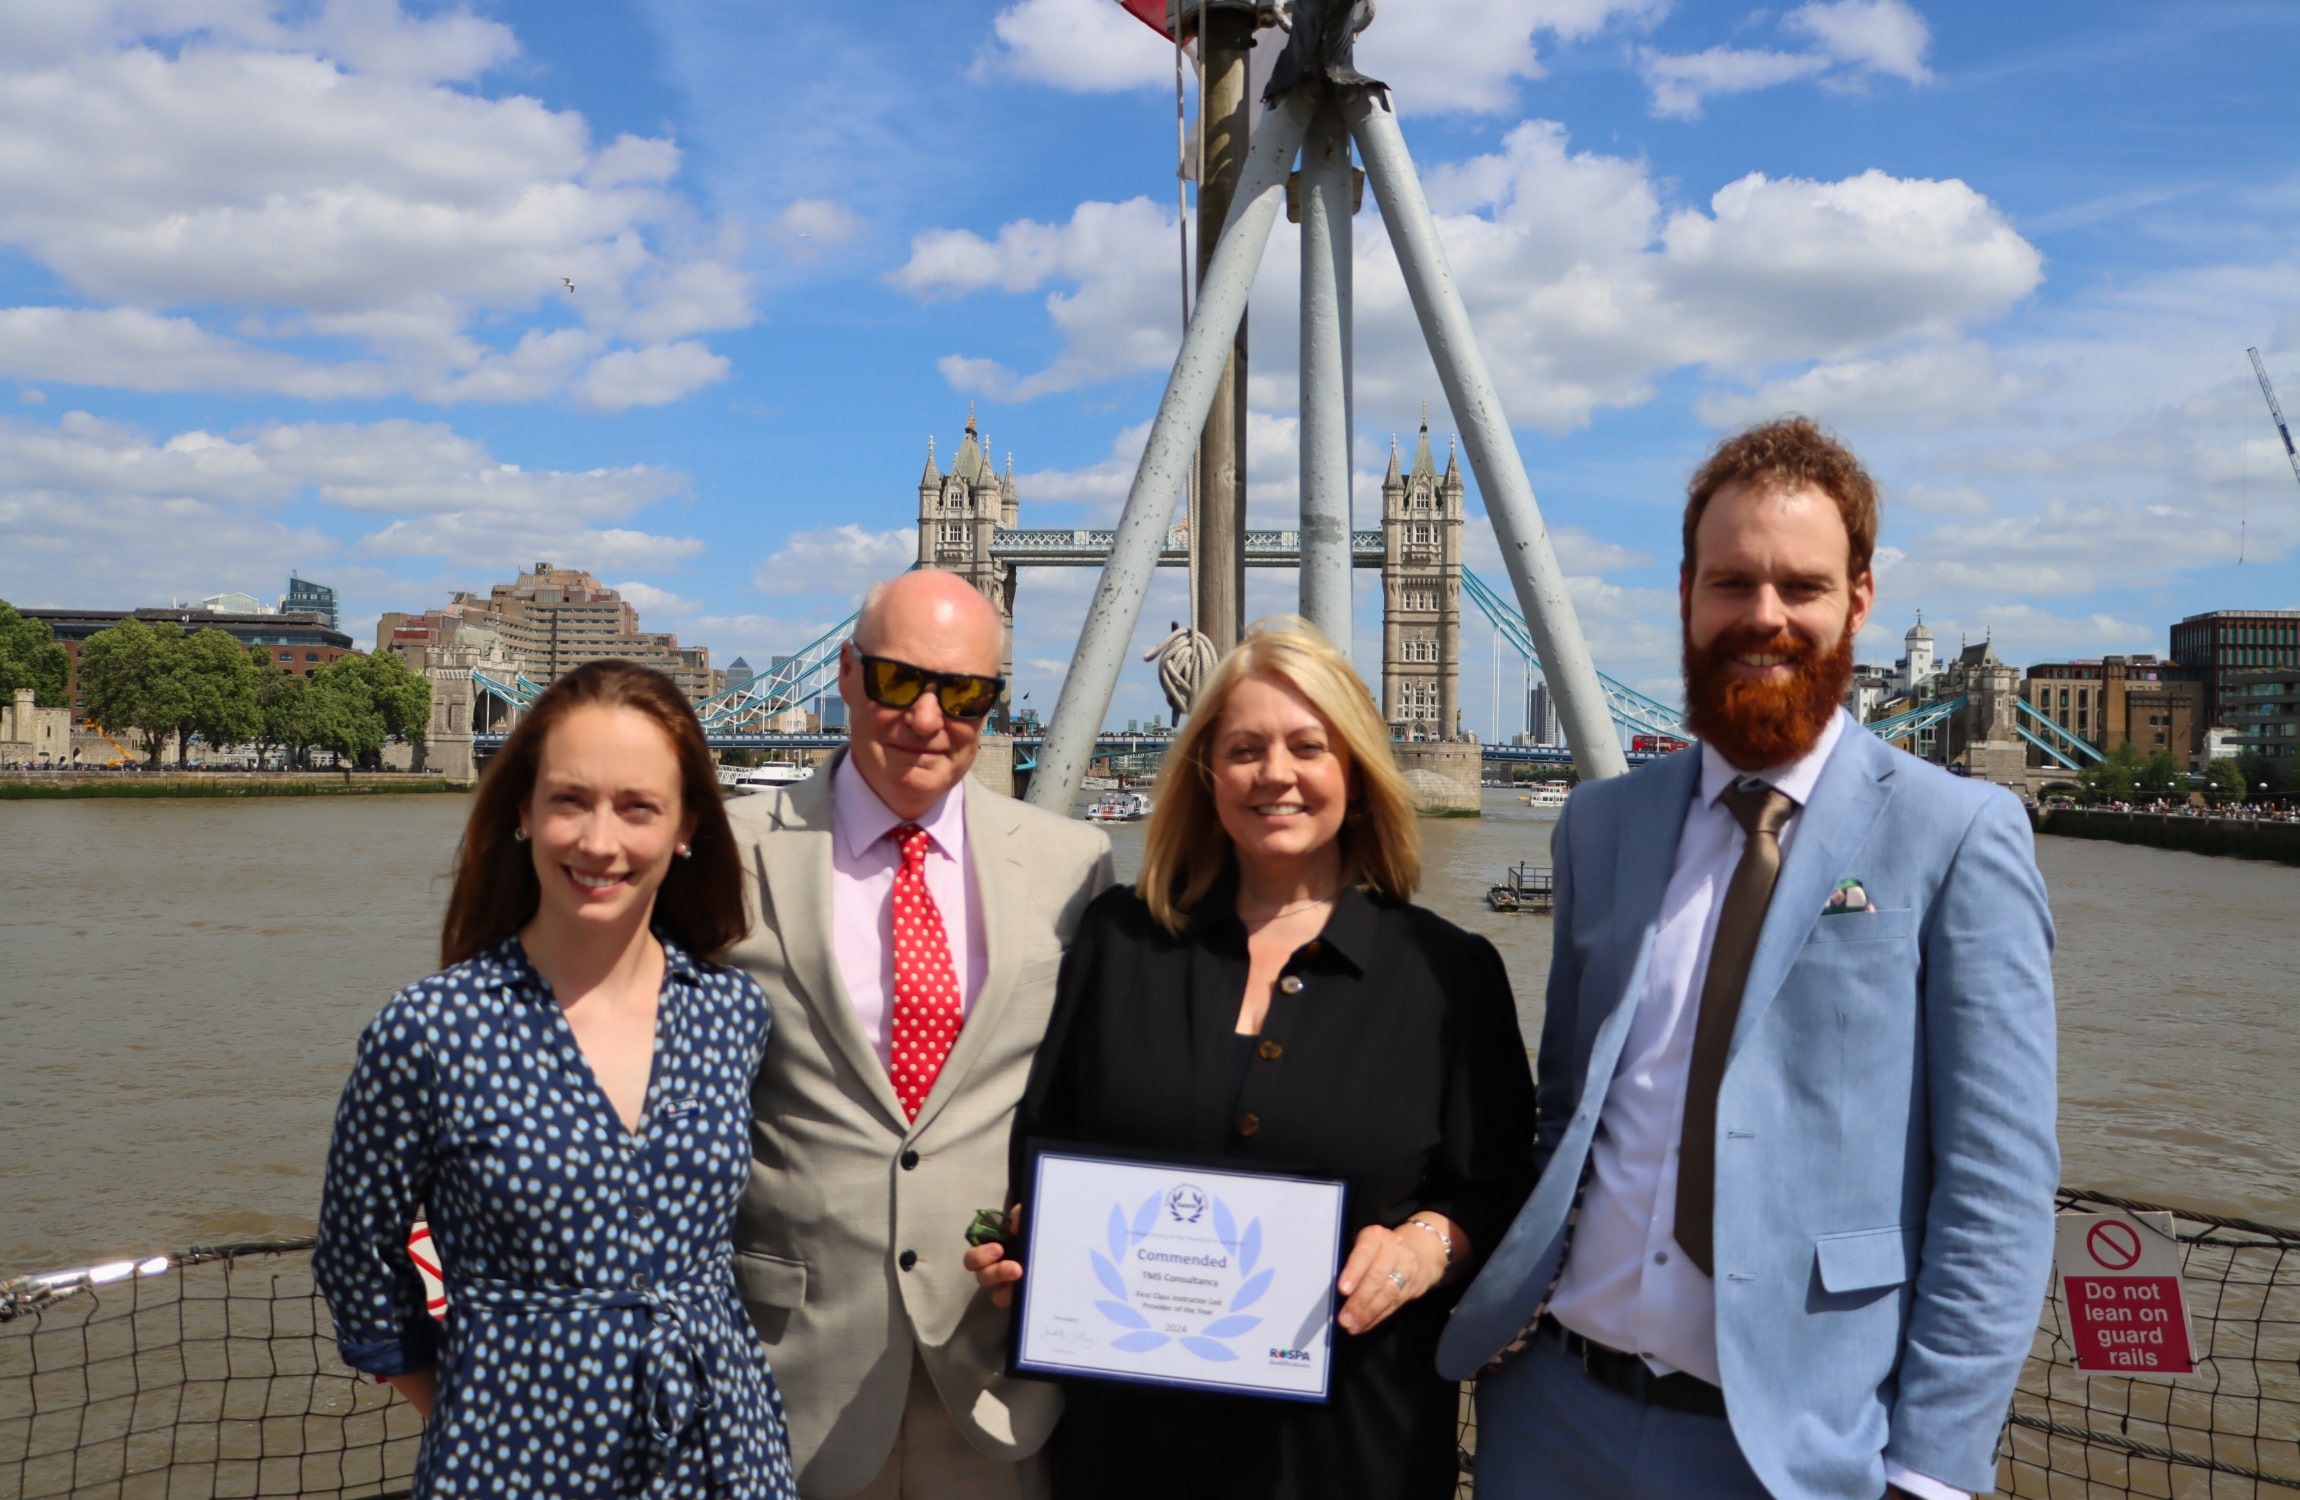 Jess Waldron (TMS), Steve Proctor (TMS), Tara Jowett (TMS) and Richard Cook (TMS) behind tower bridge and holding an award.